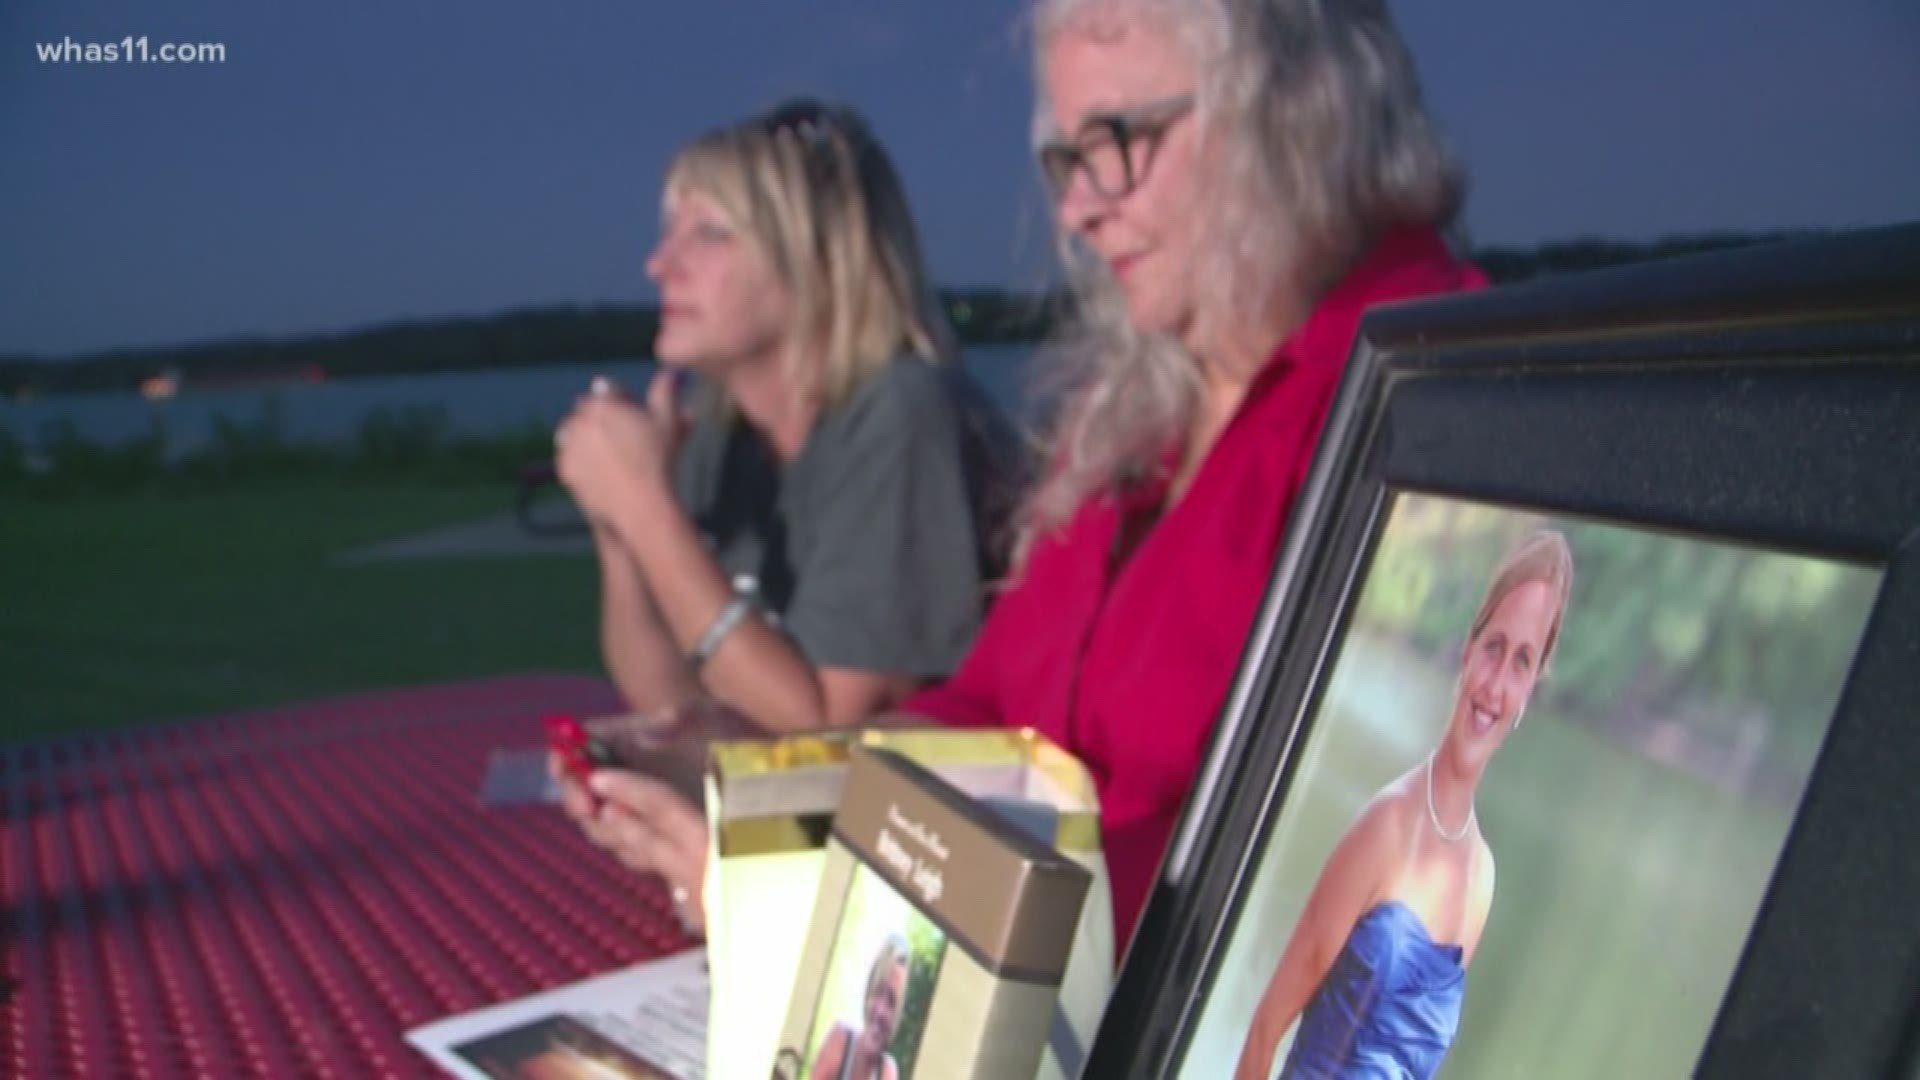 Marilyn Greenwell started Lights of Hope to help honor her daughter, Brittney, who died of an overdose. The second Lights of Hope in Jeffersonville will be held September 14 from 7 to 9 p.m. at Duffy's Landing under the gazebo.